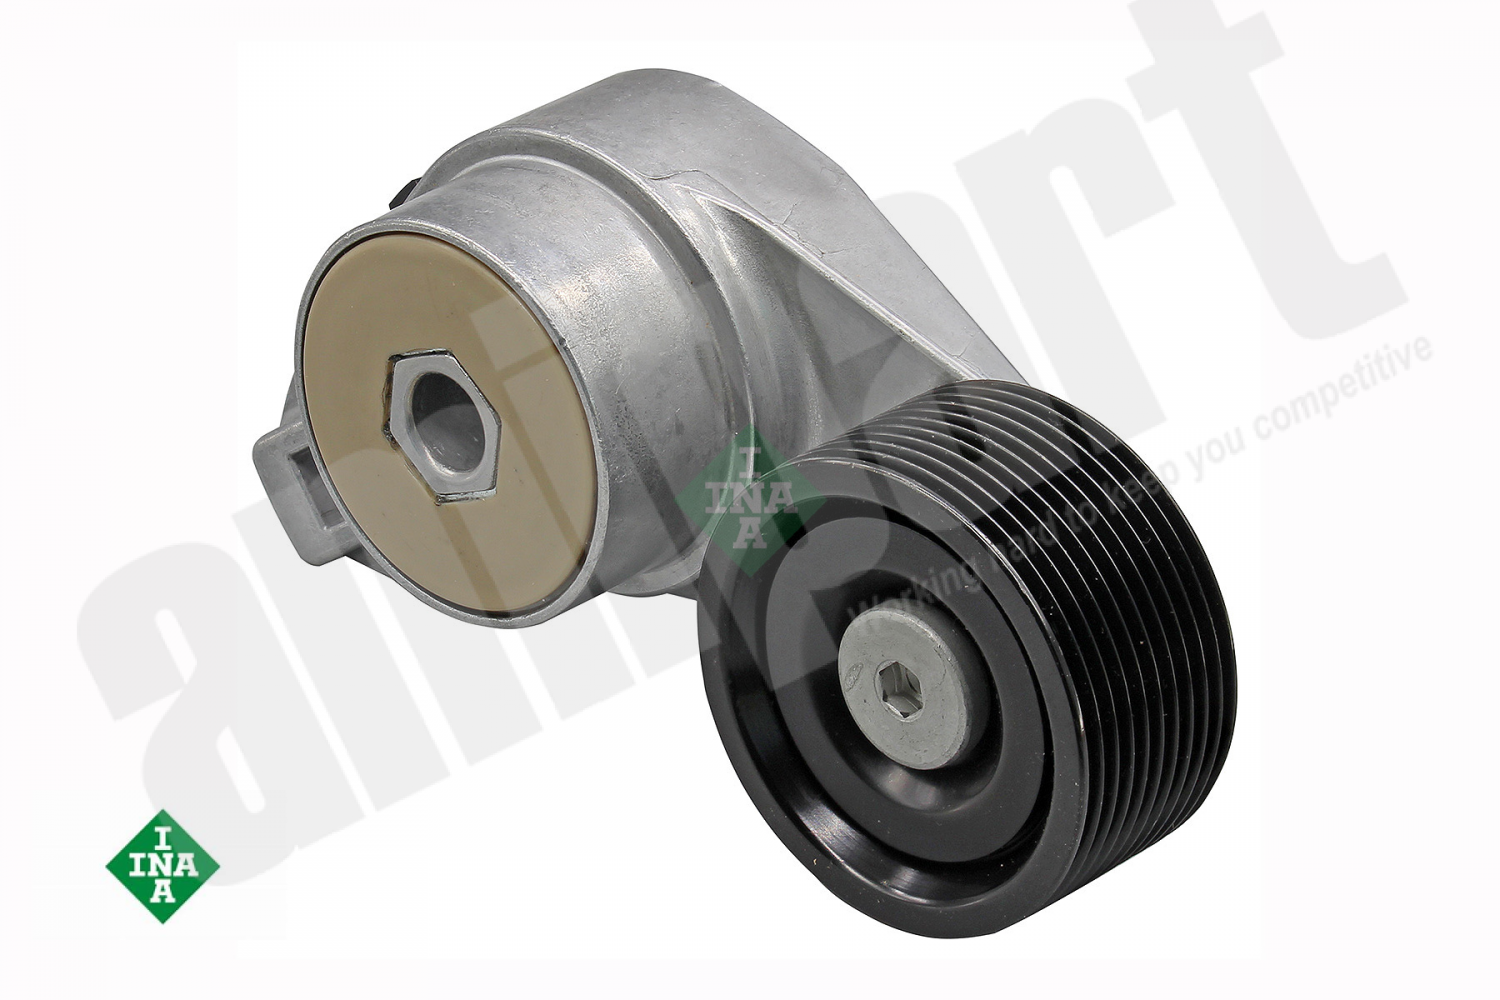 Amipart - INA BELT TENSIONER